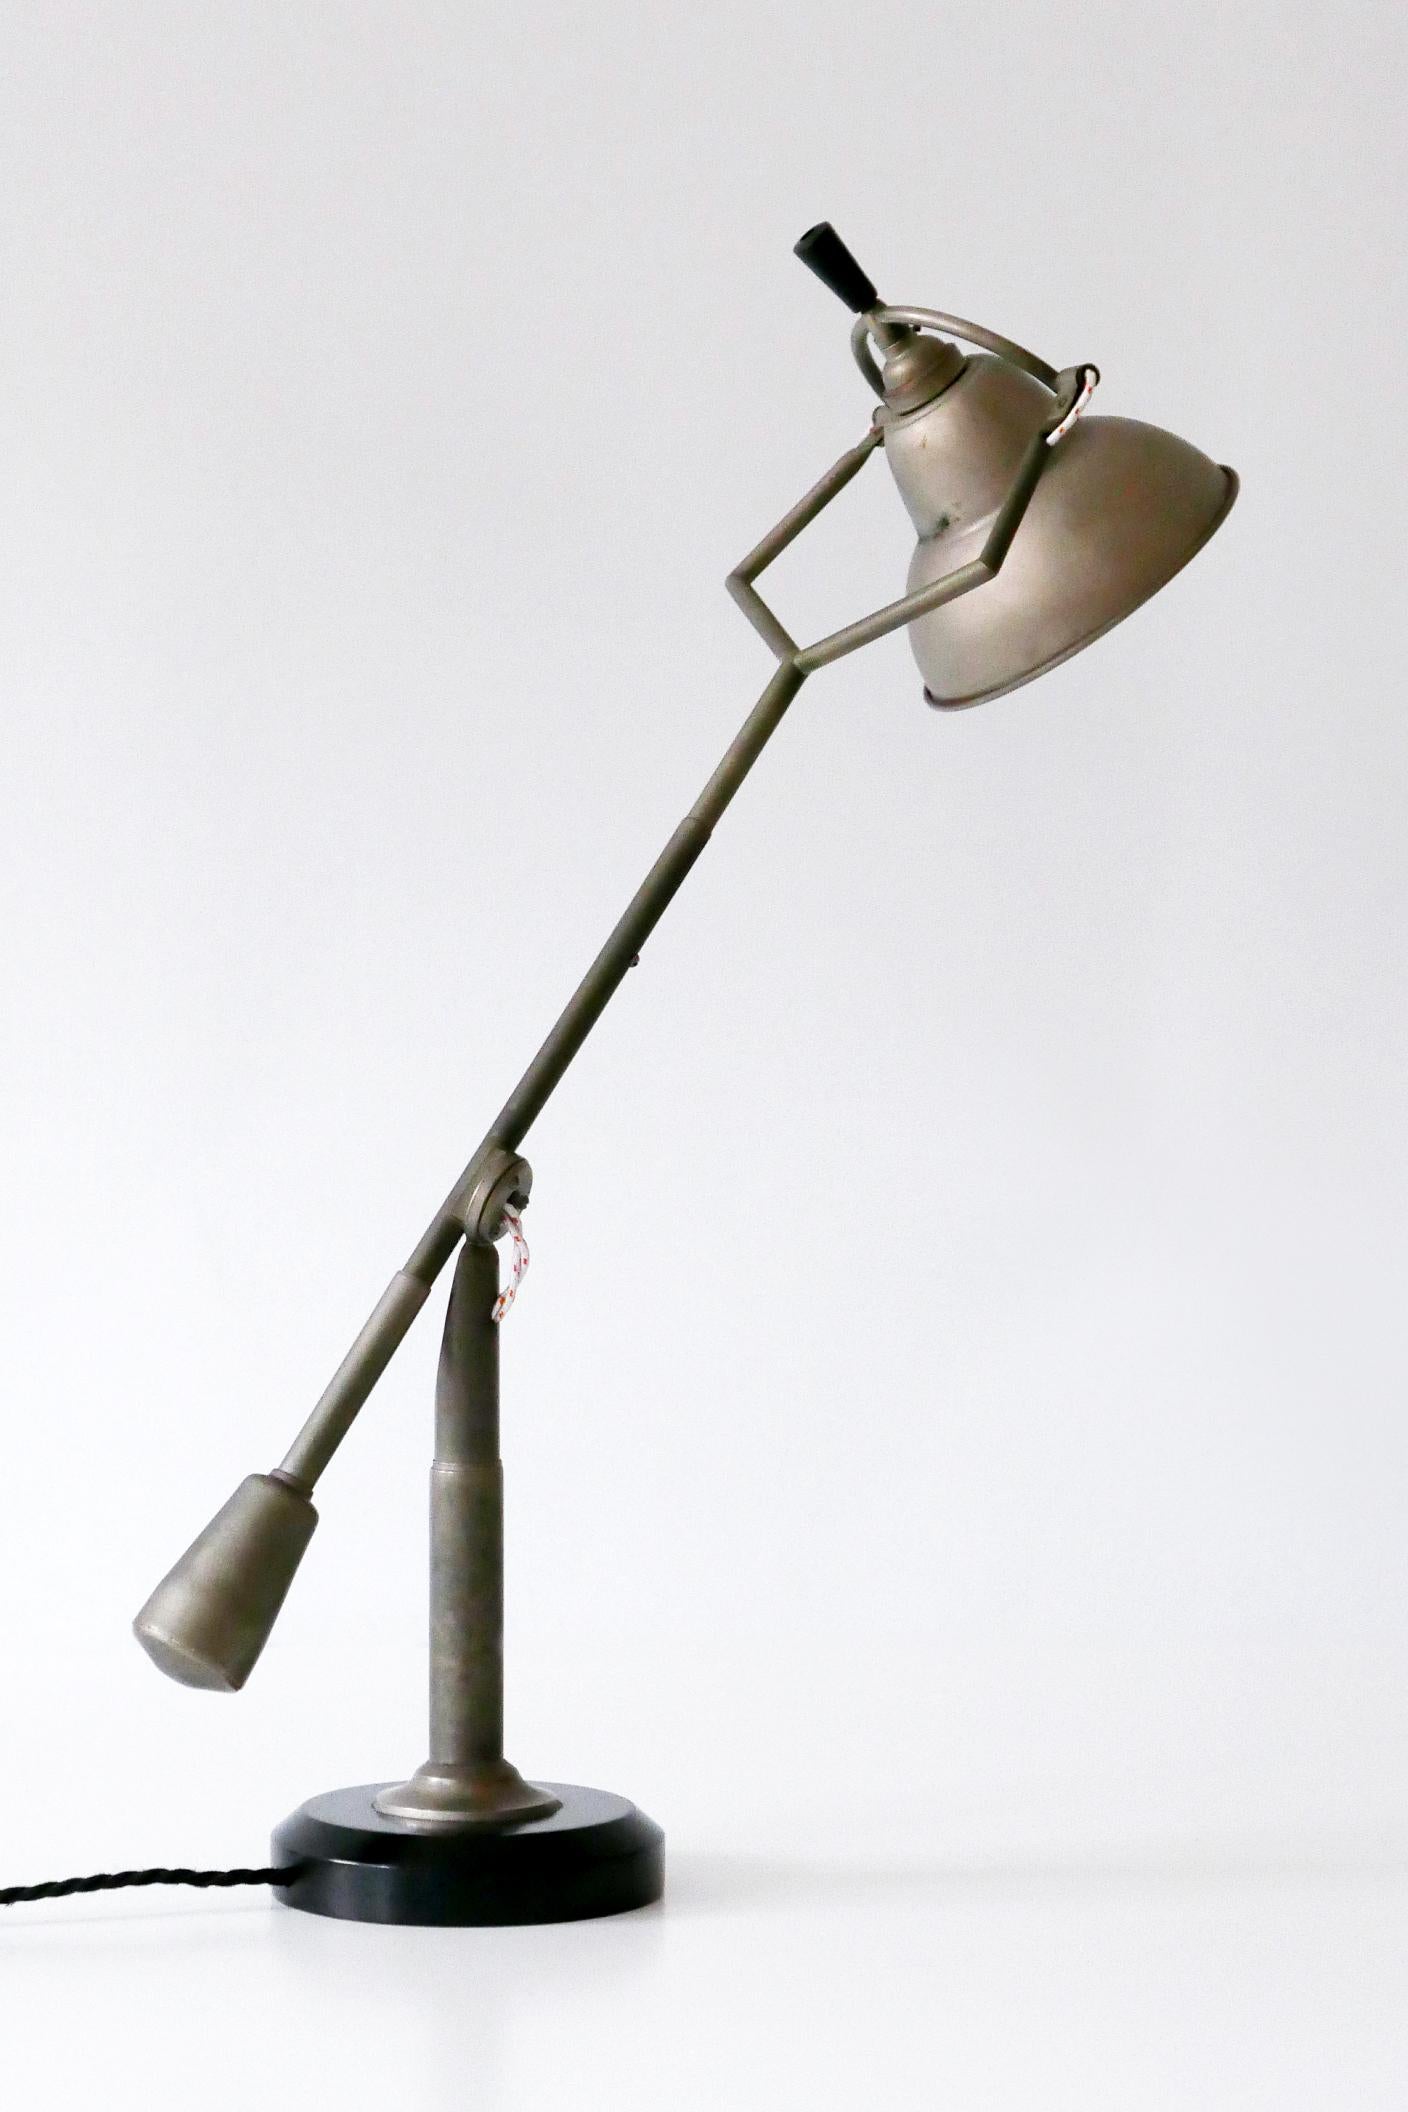 Art Deco Modernist Counterbalance Table Lamp by Edouard-Wilfred Buquet, 1927, France For Sale